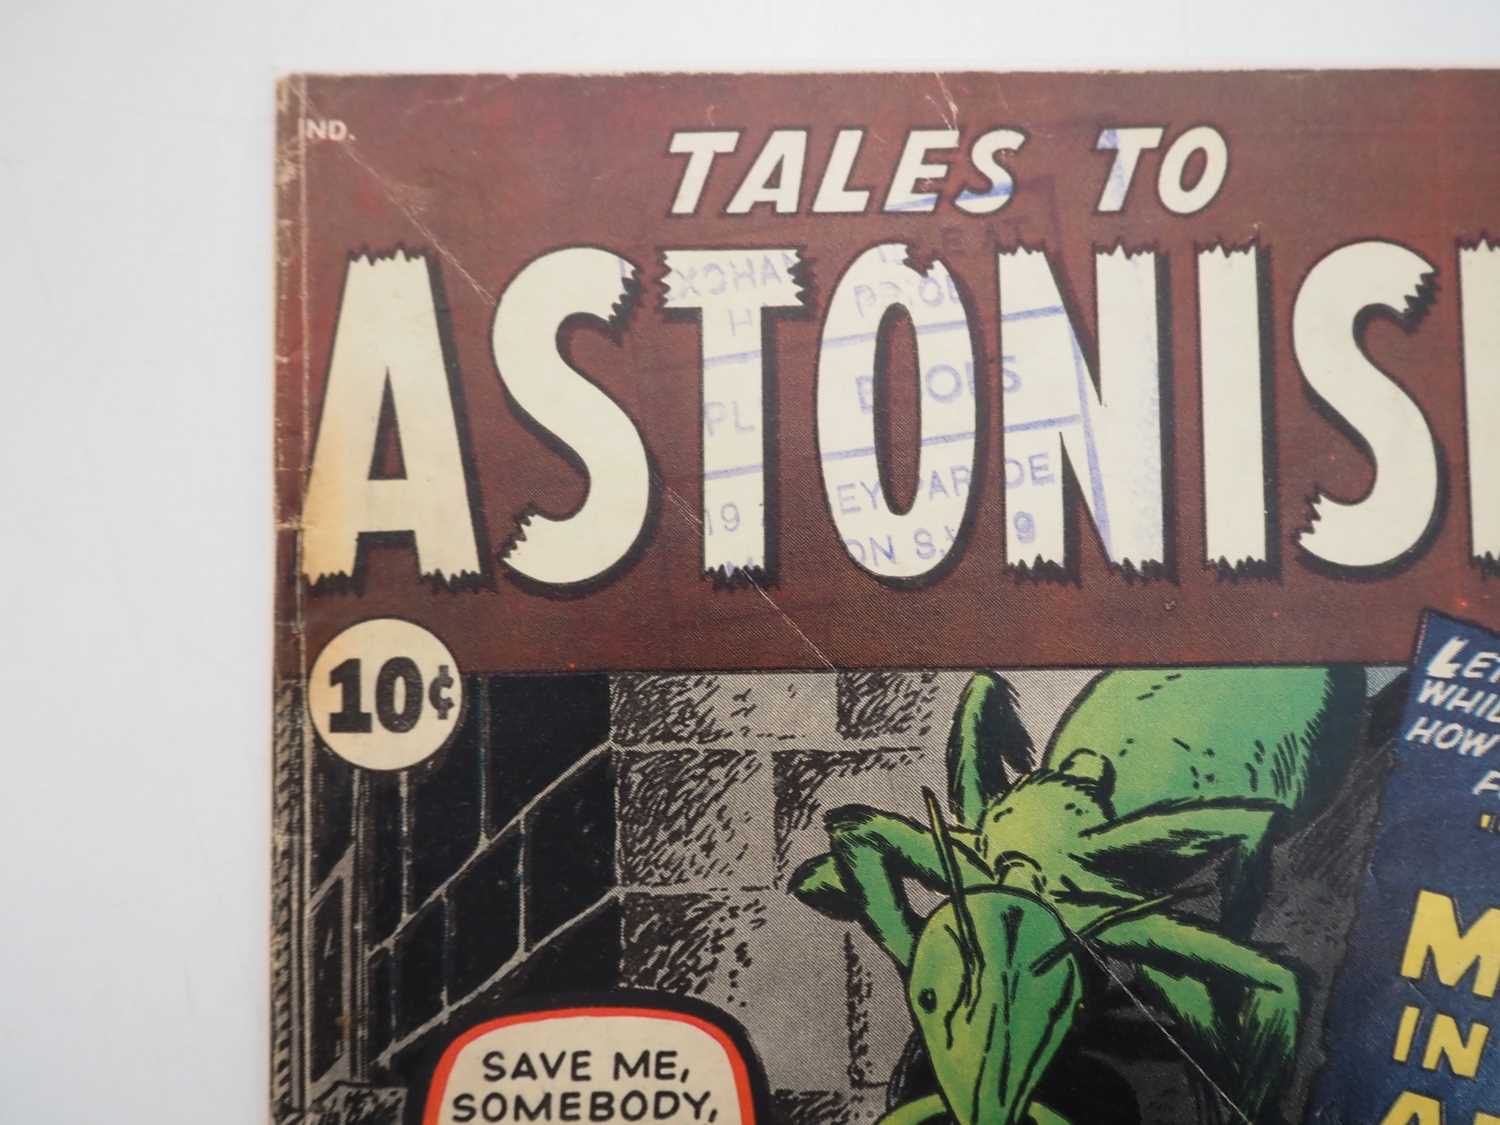 TALES TO ASTONISH #27 (1962 - MARVEL) - First appearance of Ant-Man (Henry Pym) + Currently #12 on - Image 2 of 27